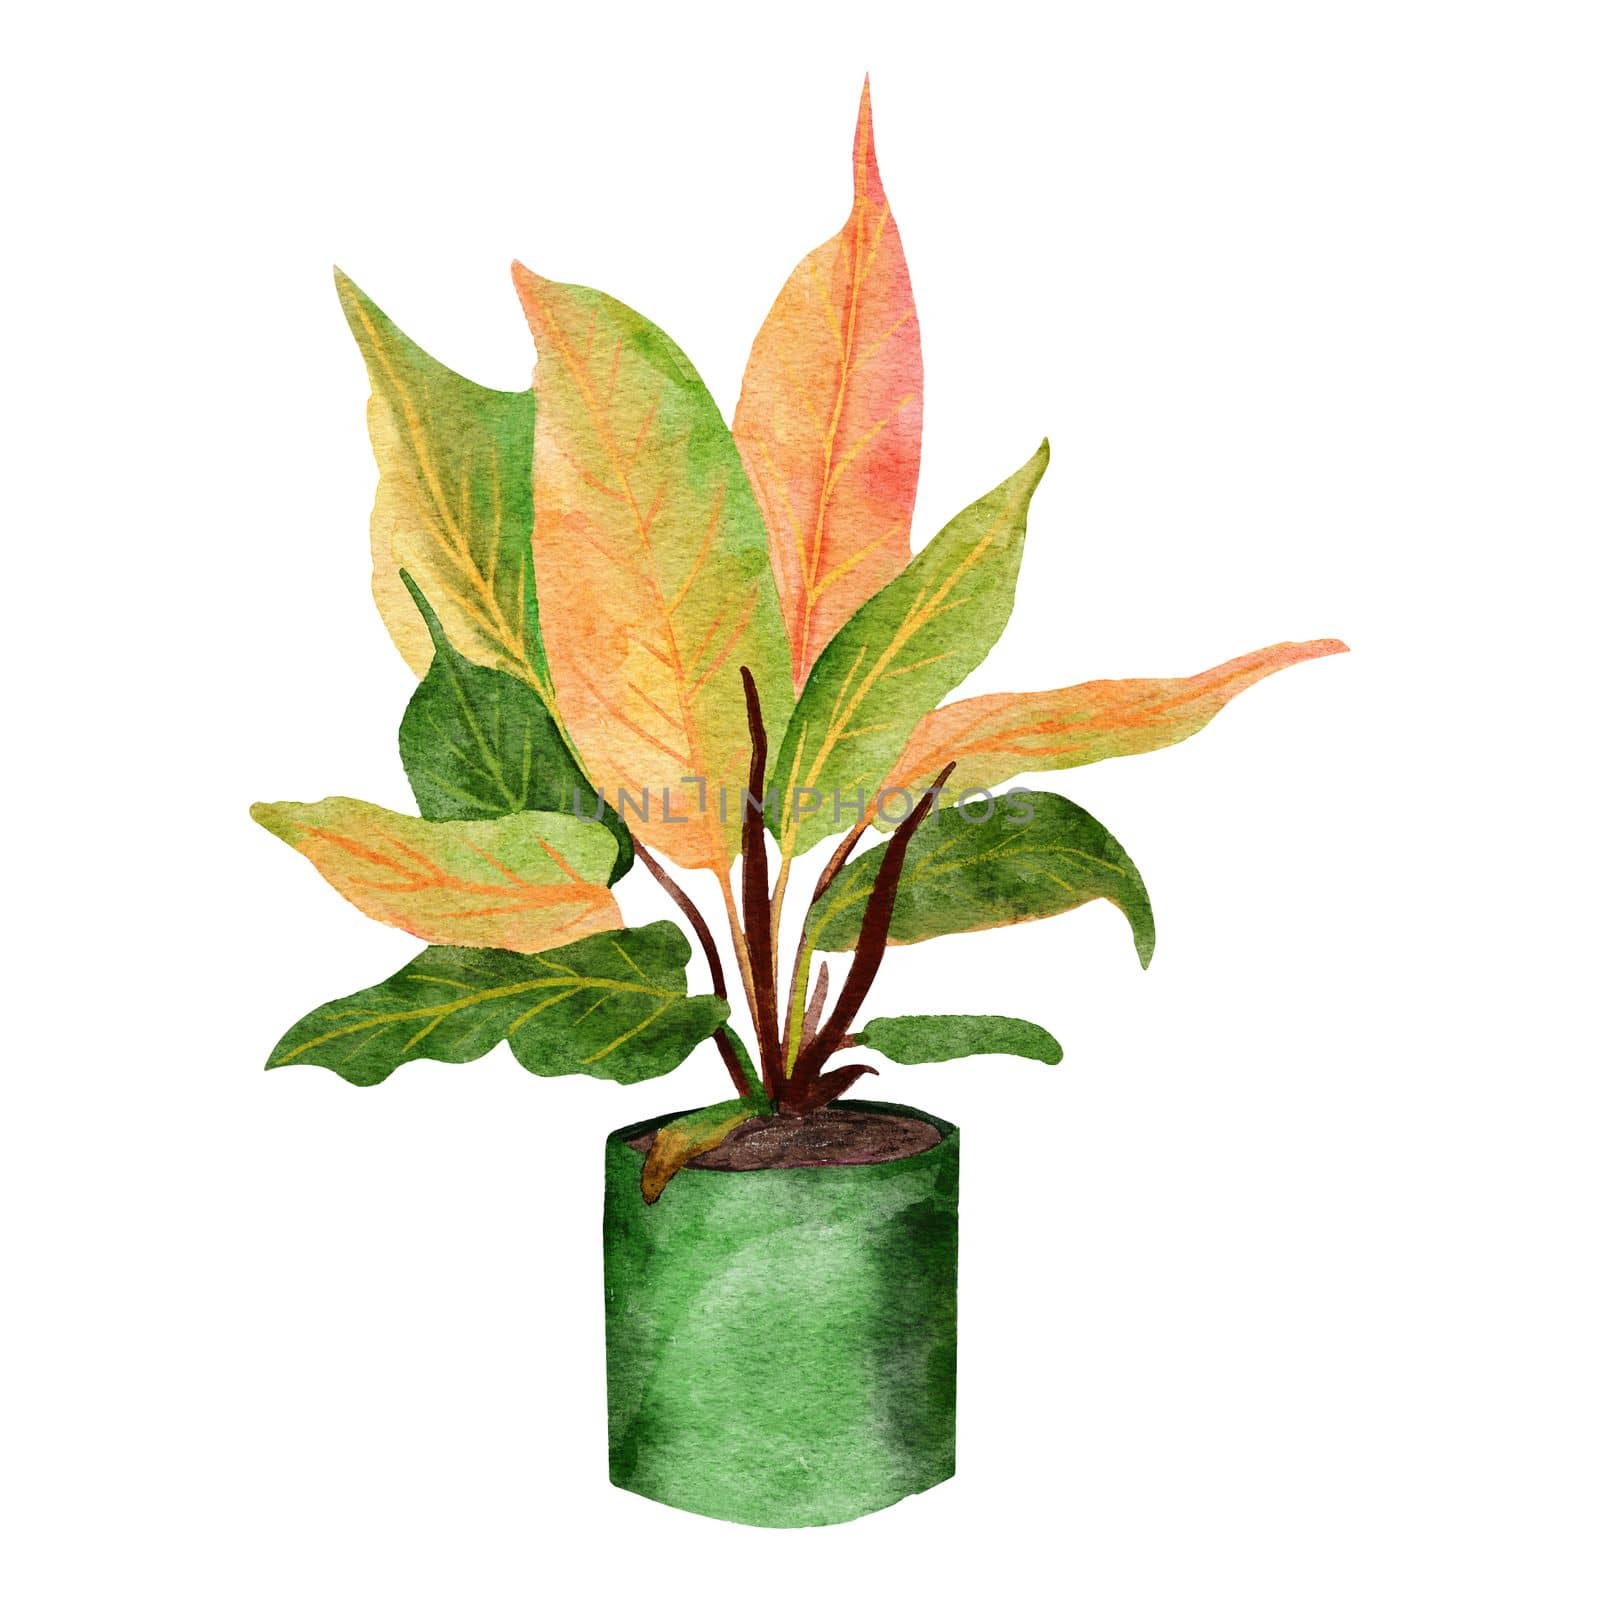 Hand drawn watercolor illustration of philodendron prince of orange houseplant, green leaves pastel pot plant flower, tropical foliage leaves, expensive variety. Urban jungle brazil nature lovers species herb.. by Lagmar